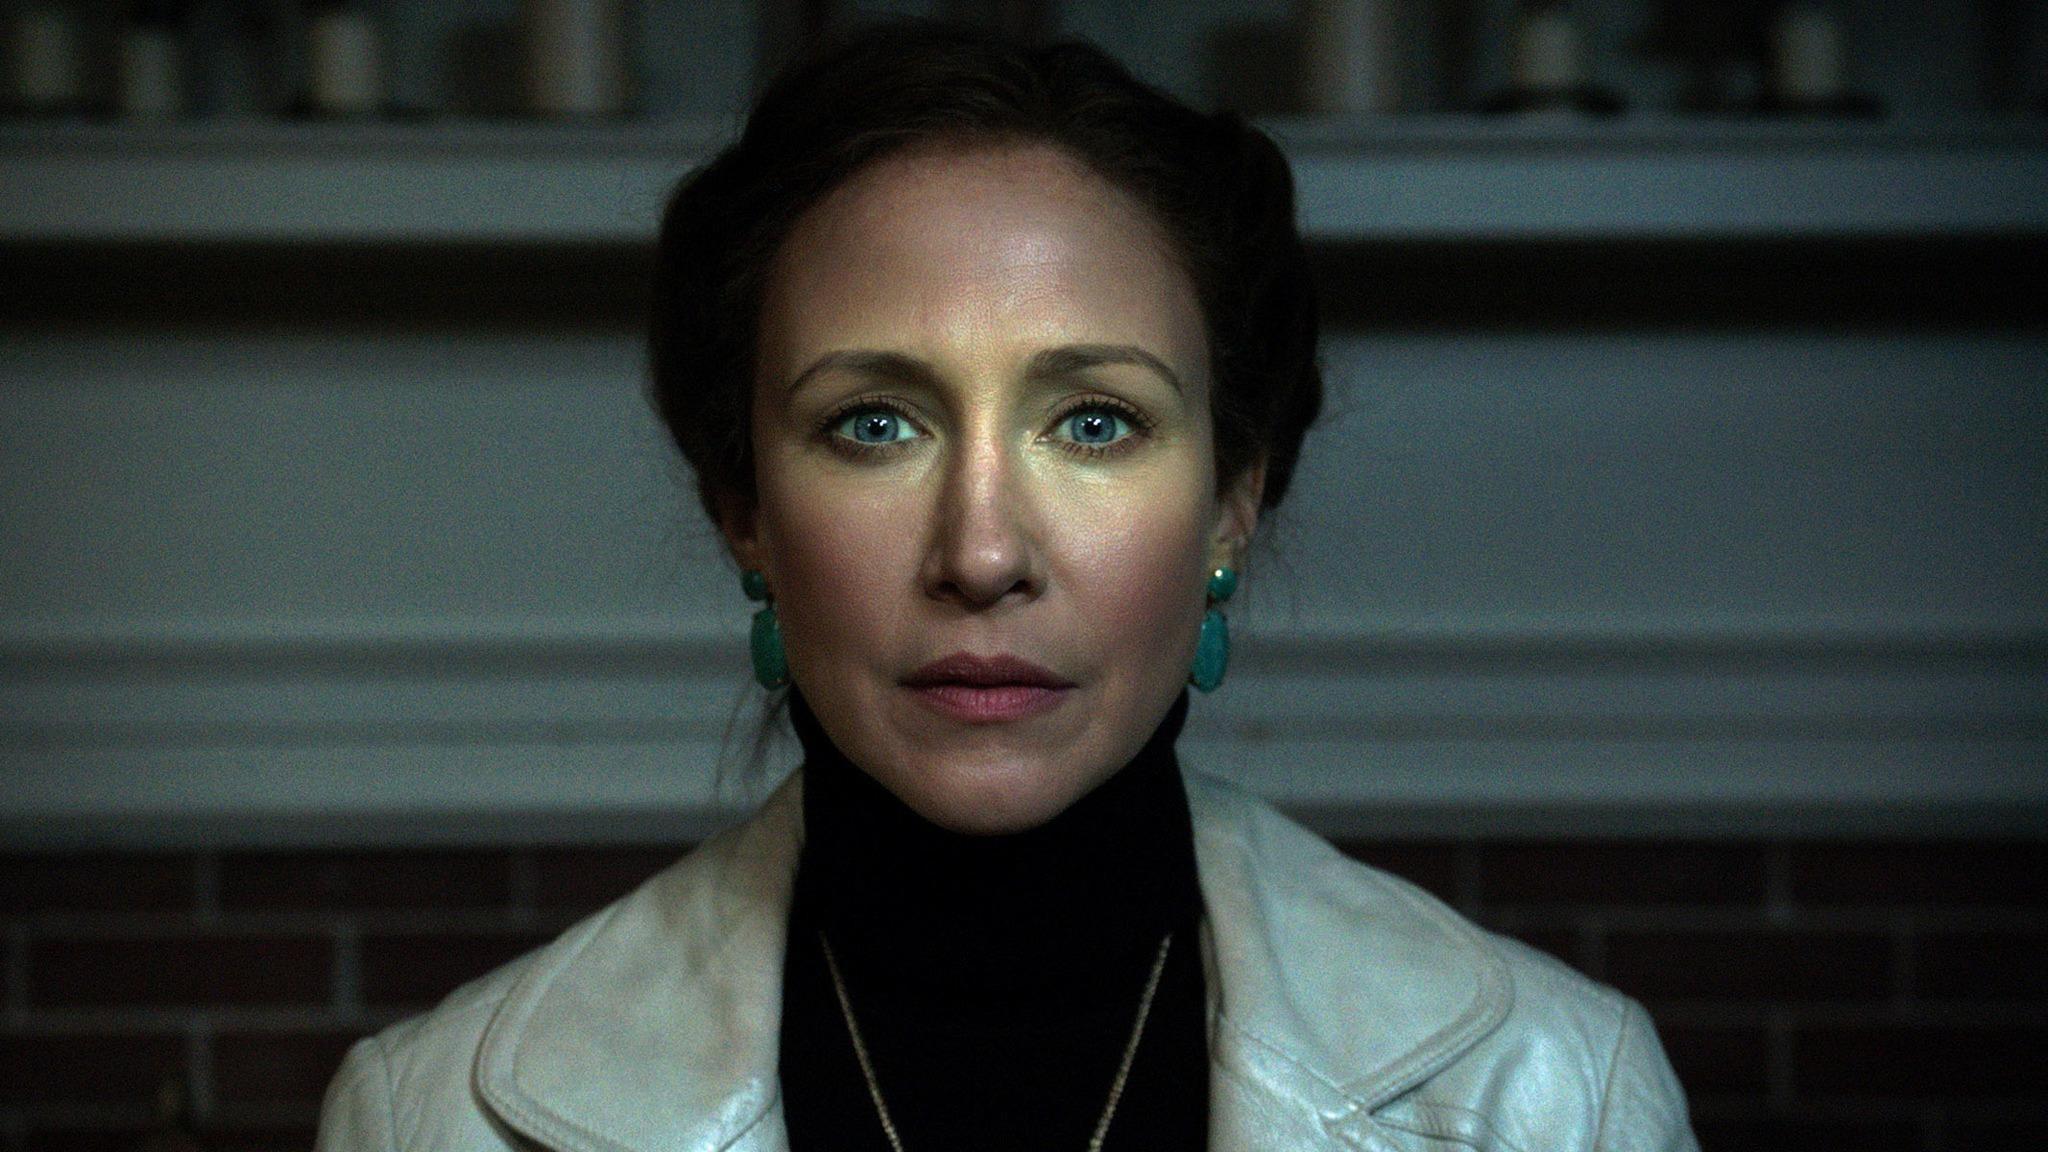 The Conjuring 2 Wallpaper HD Horor Movie Photo Collections